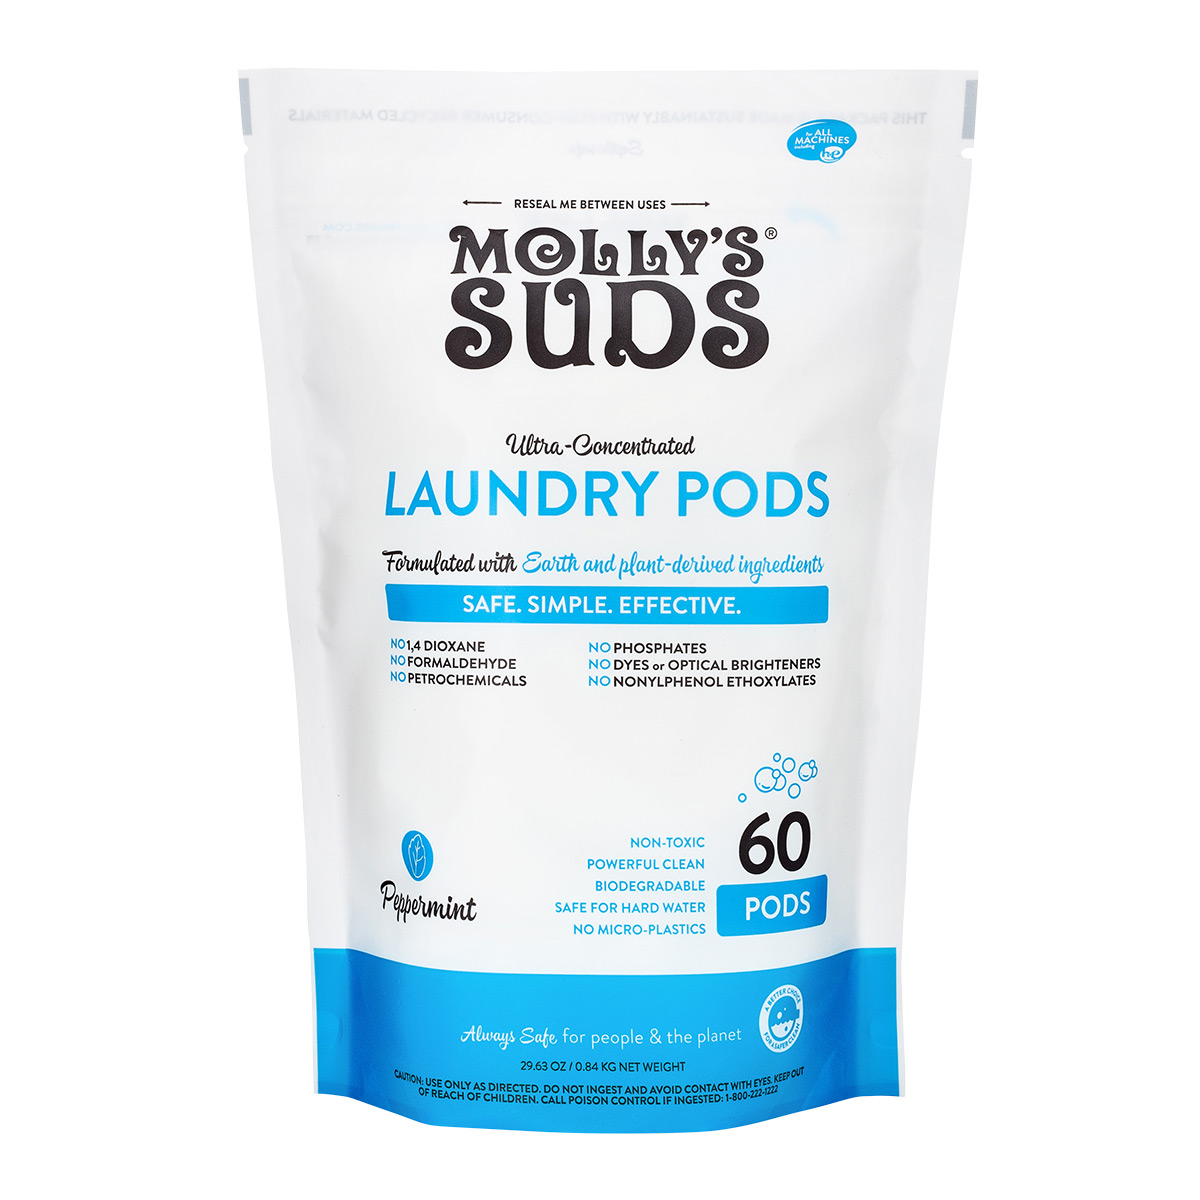 https://www.containerstore.com/catalogimages/480484/10093092-molly-suds-laundry-detergen.jpg